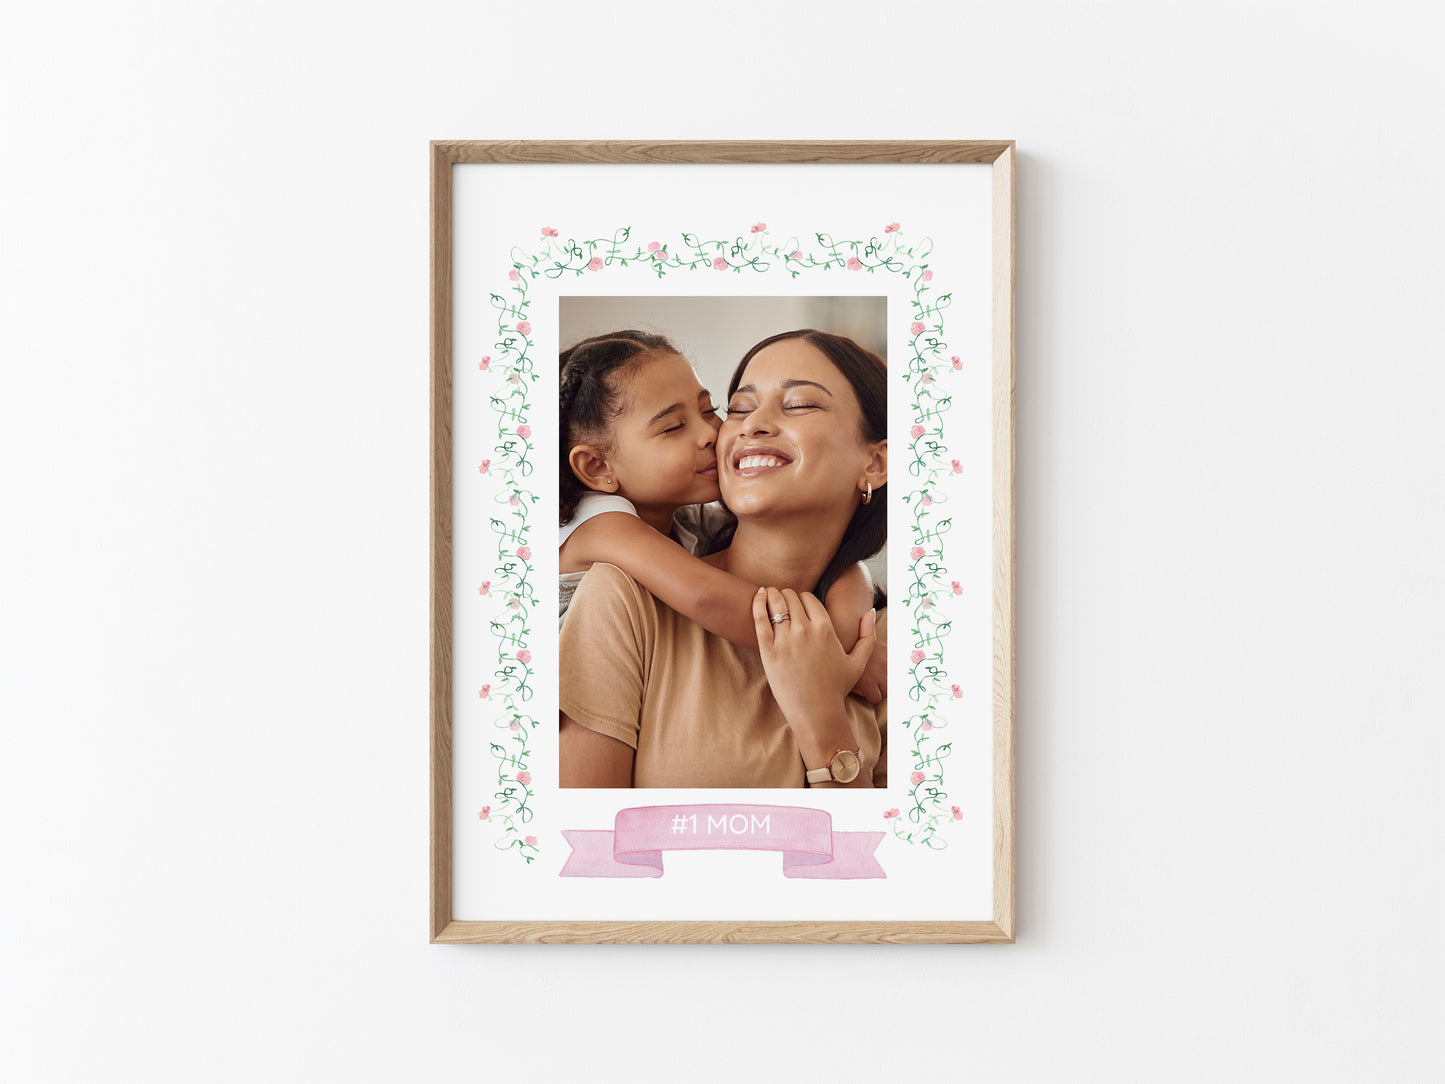 #1 Mom 5x7 Photo Mat with Envelope